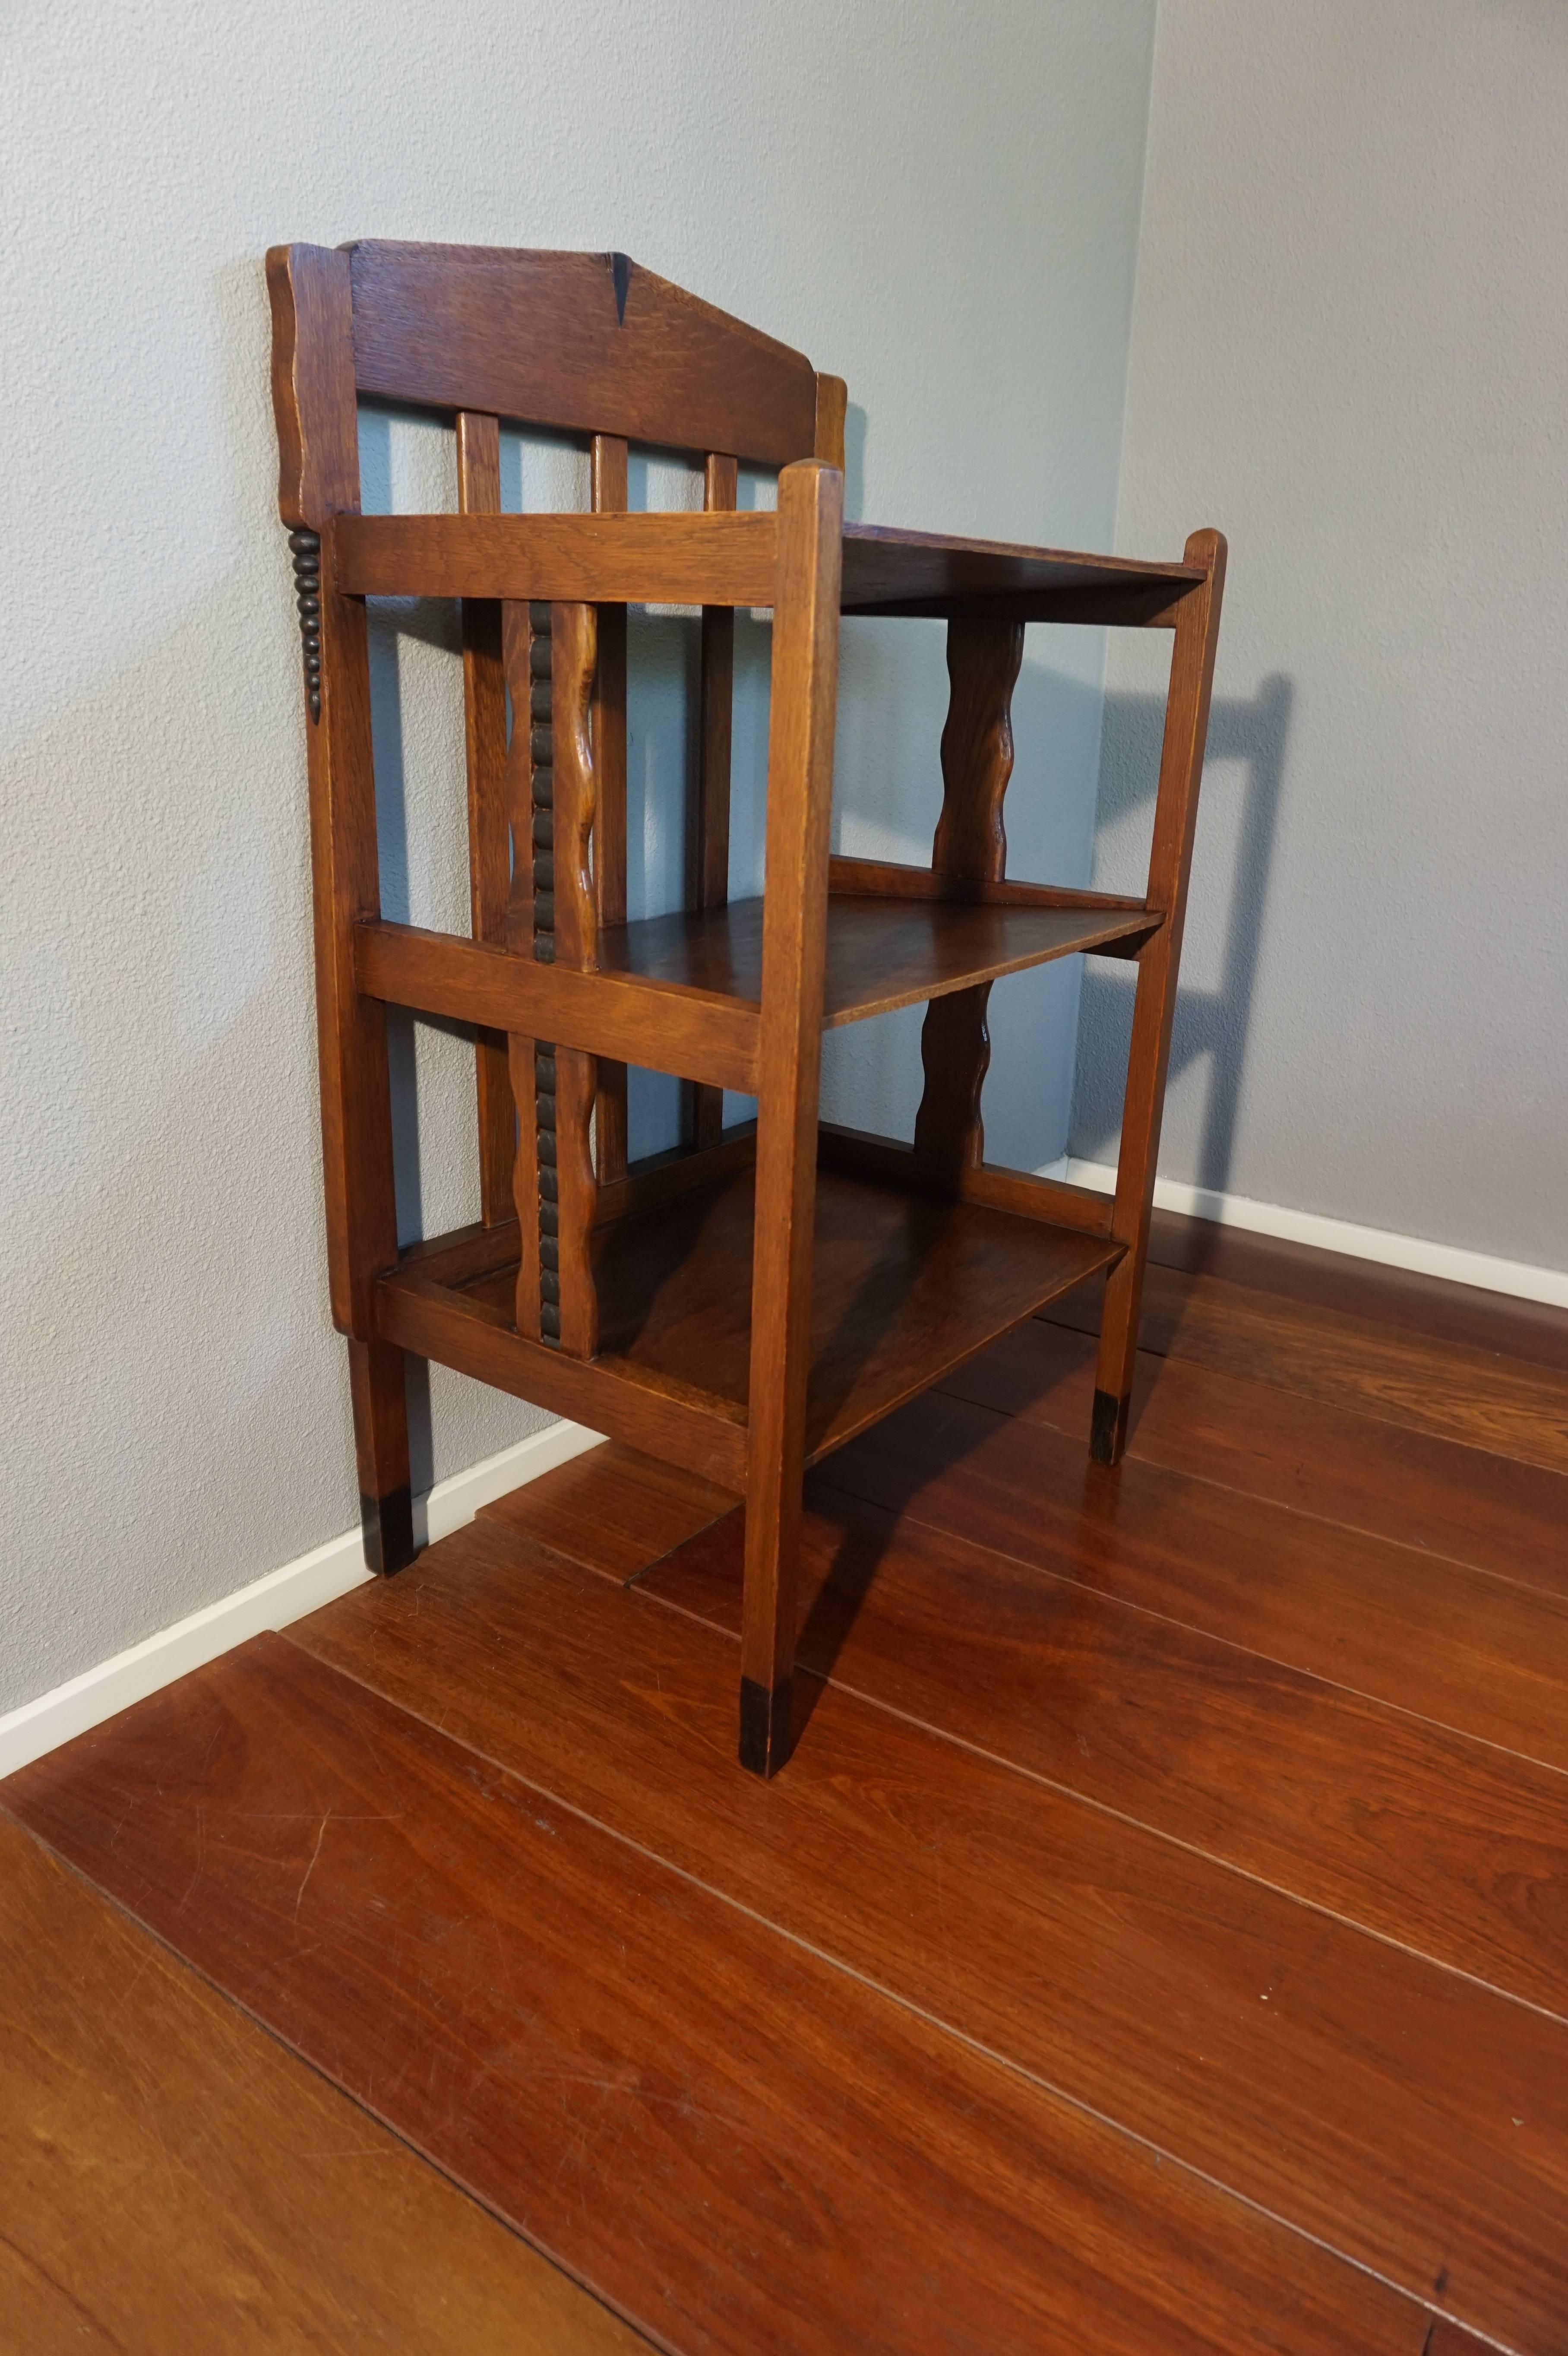 Stylish and practical magazine stand from the early 1900s.

We have been in the arts and antiques trade for over 25 years and we had never seen a Dutch Arts and Crafts magazine stand. To find one in such fine condition more than made our day. It is